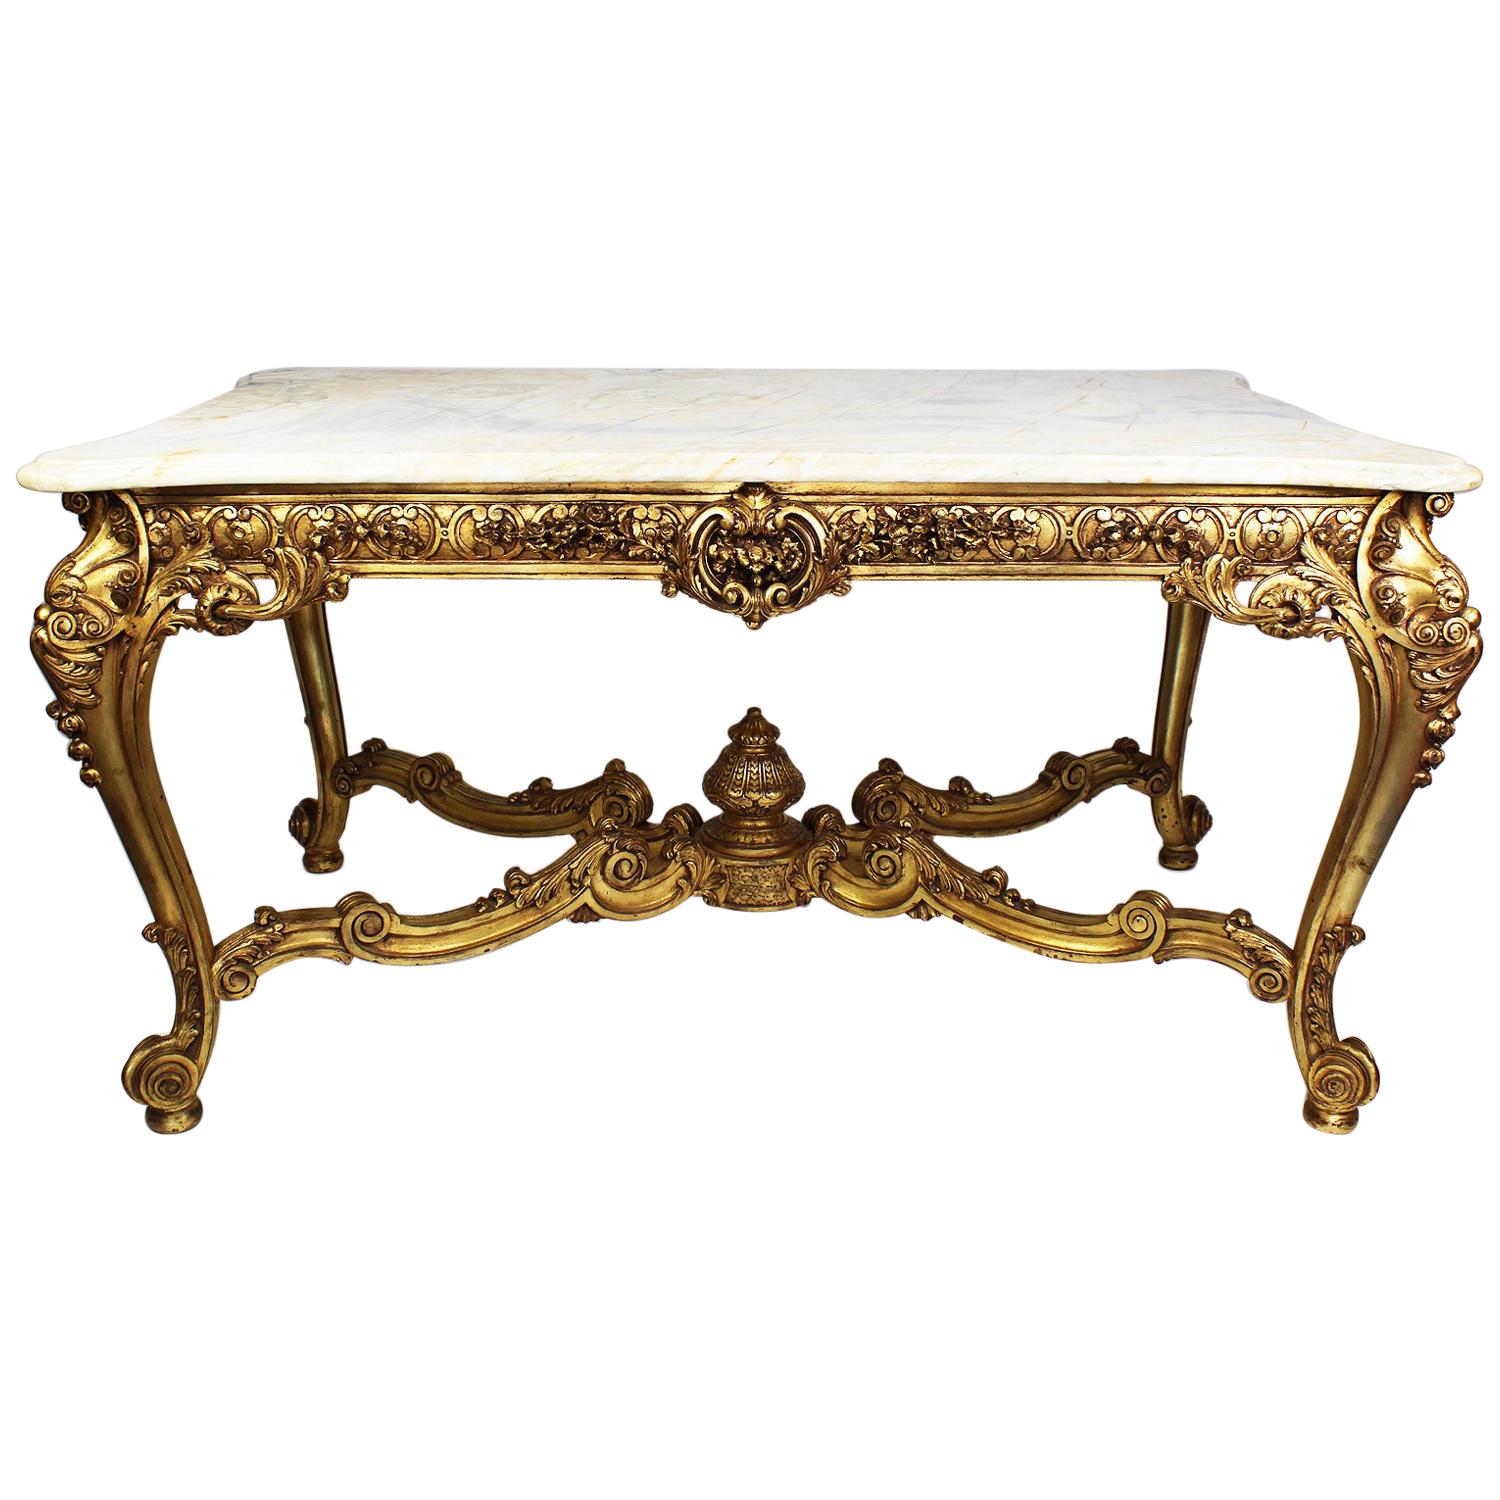 Fine French 19th-20th Century Louis XV Style Giltwood Carved Center Hall Table